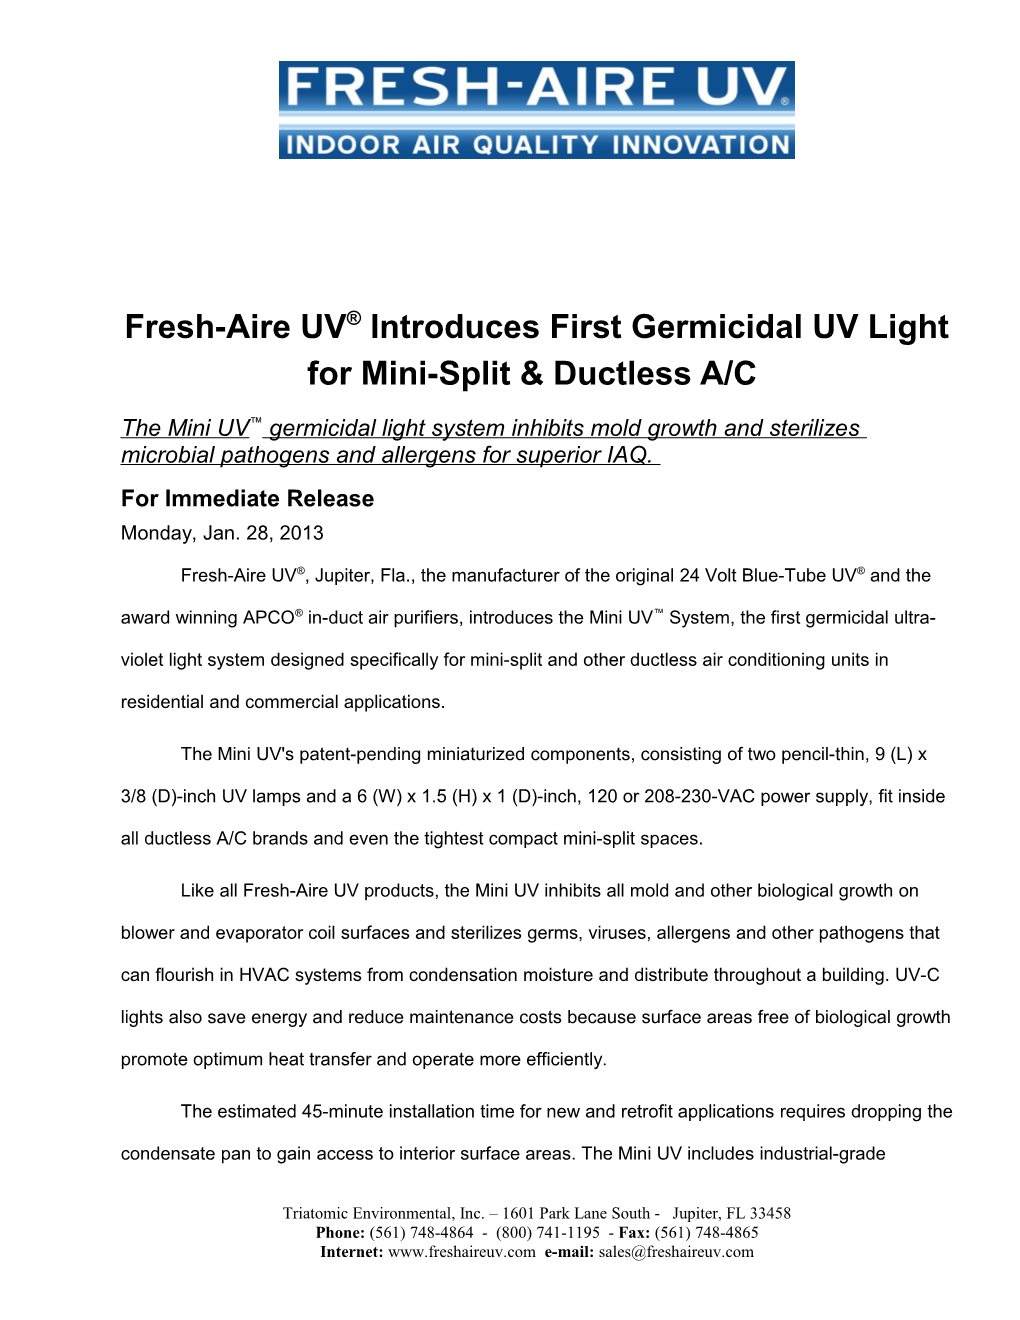 Fresh-Aire UV Introduces First Germicidal UV Light for Mini-Split & Ductless A/C